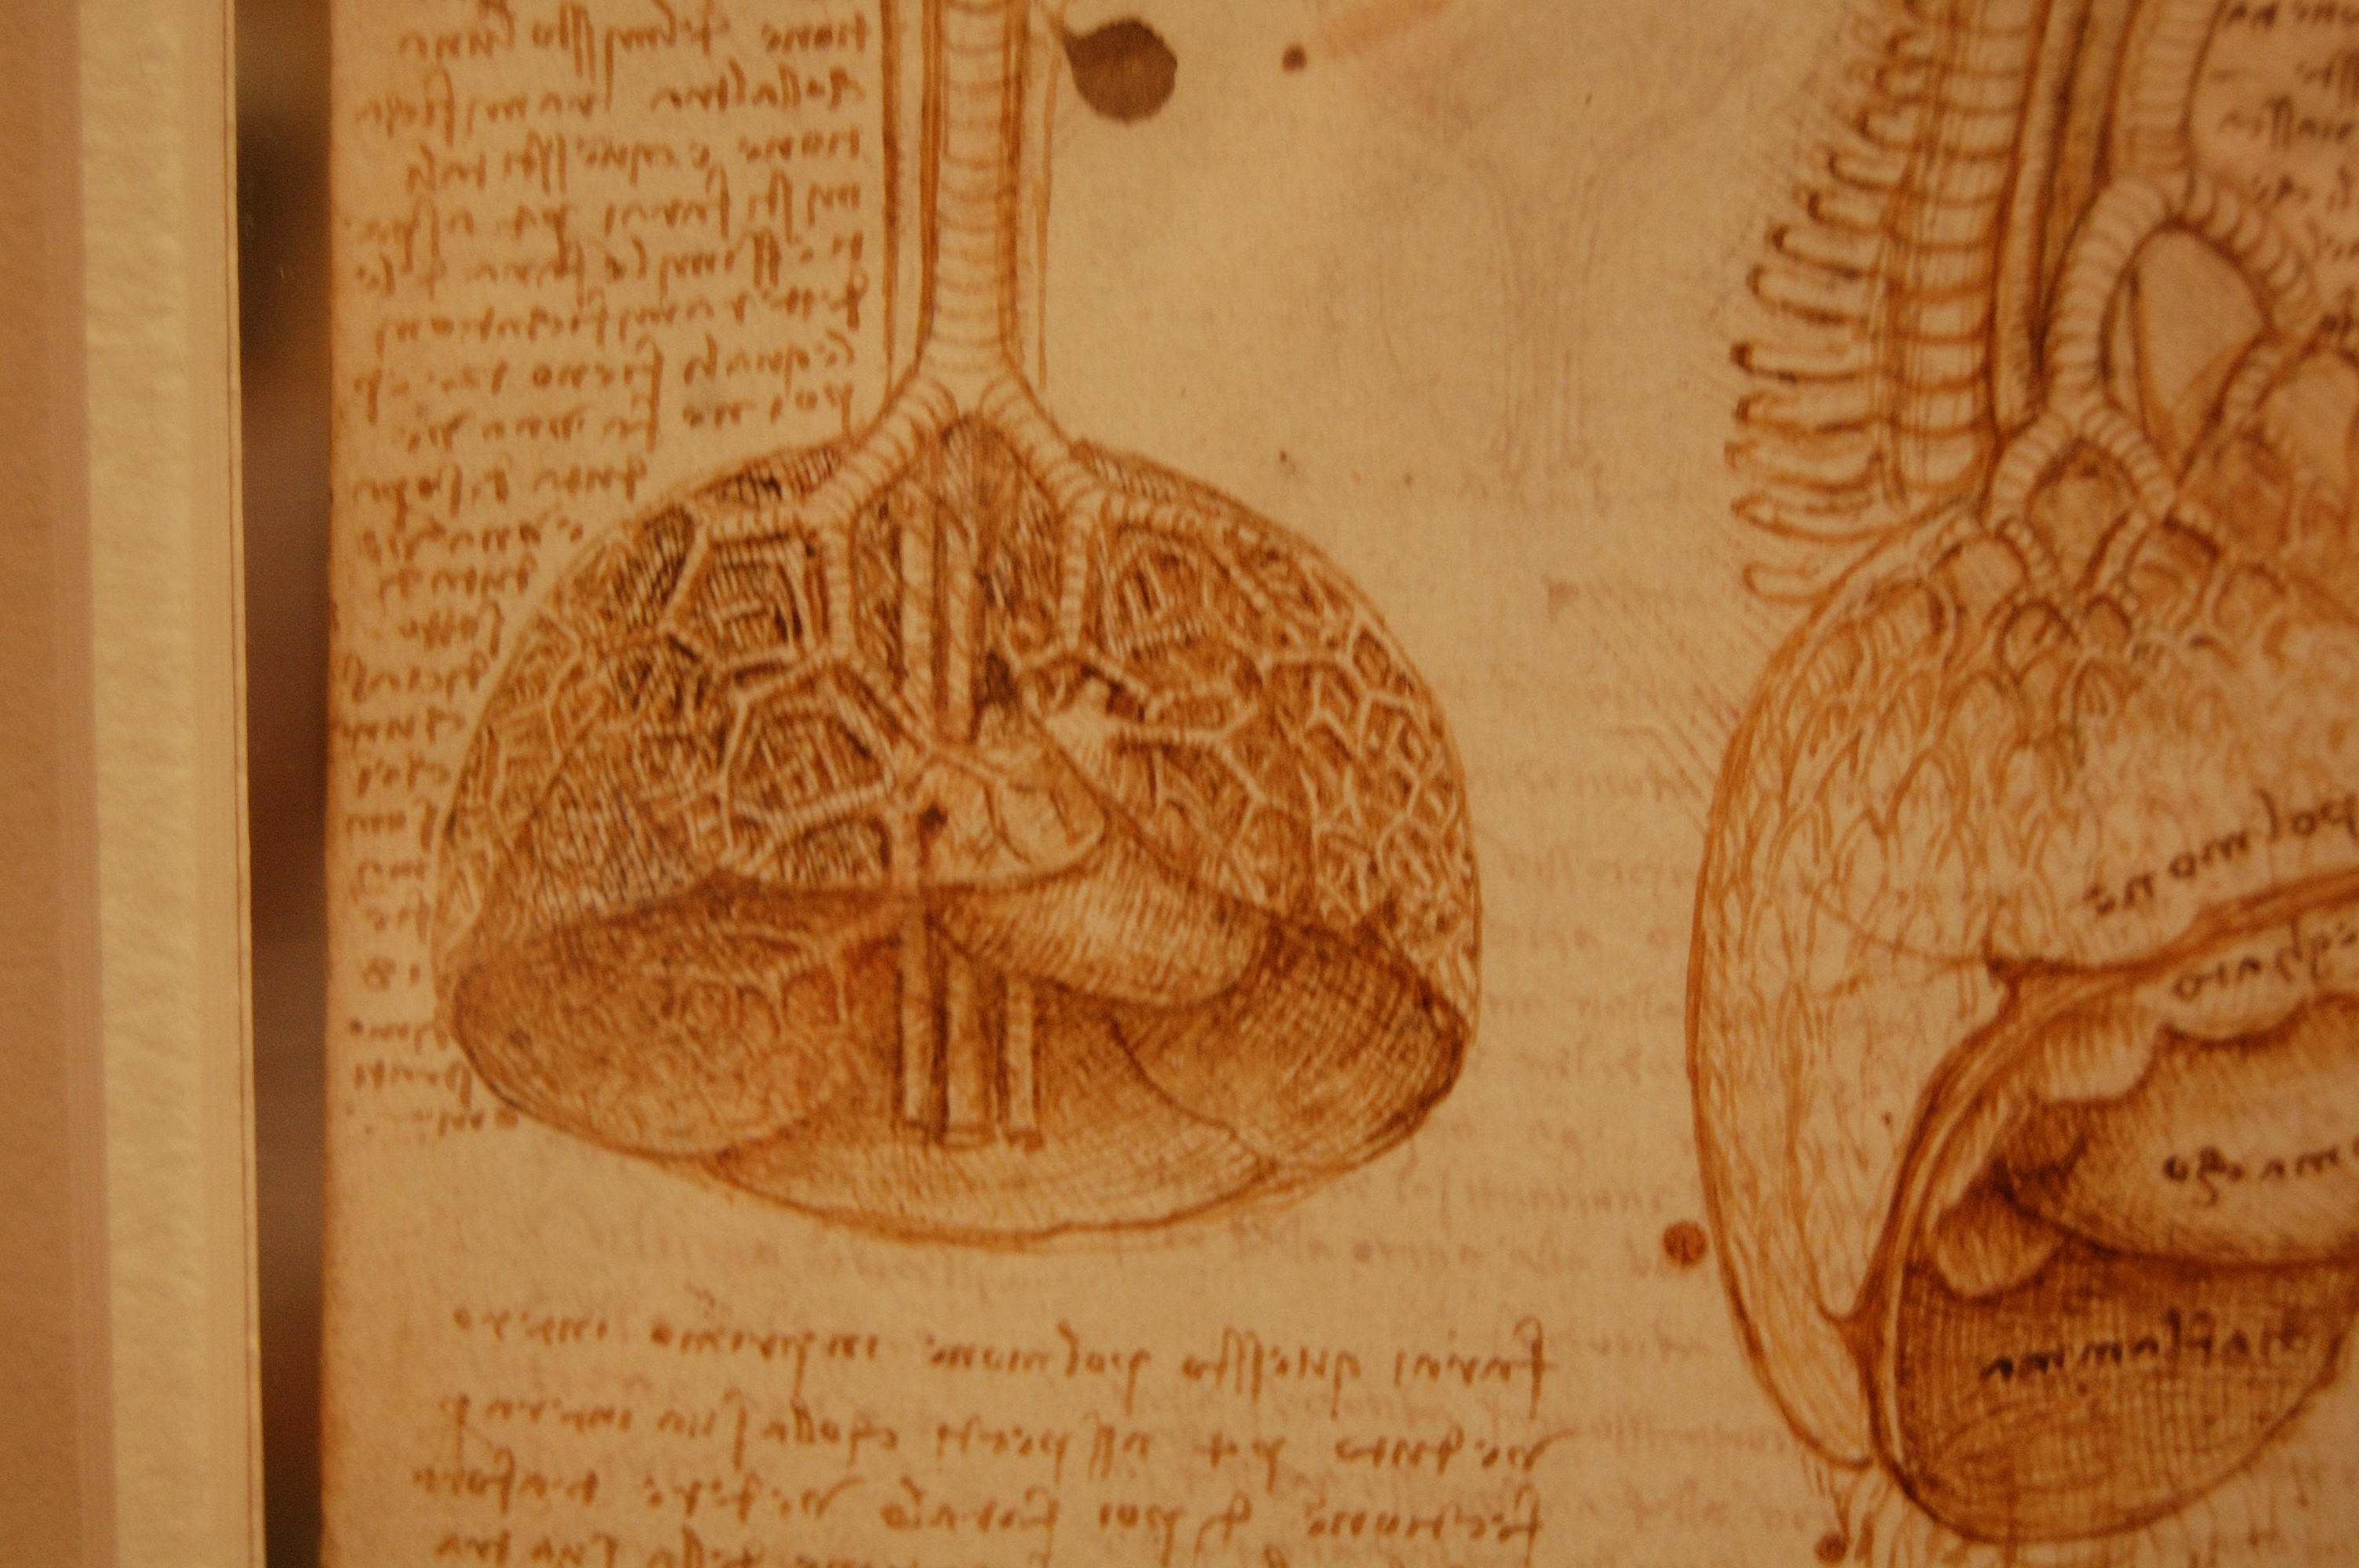 3008x2000 Da Vinci's Anatomical Drawings by roony-of-the-wood on .